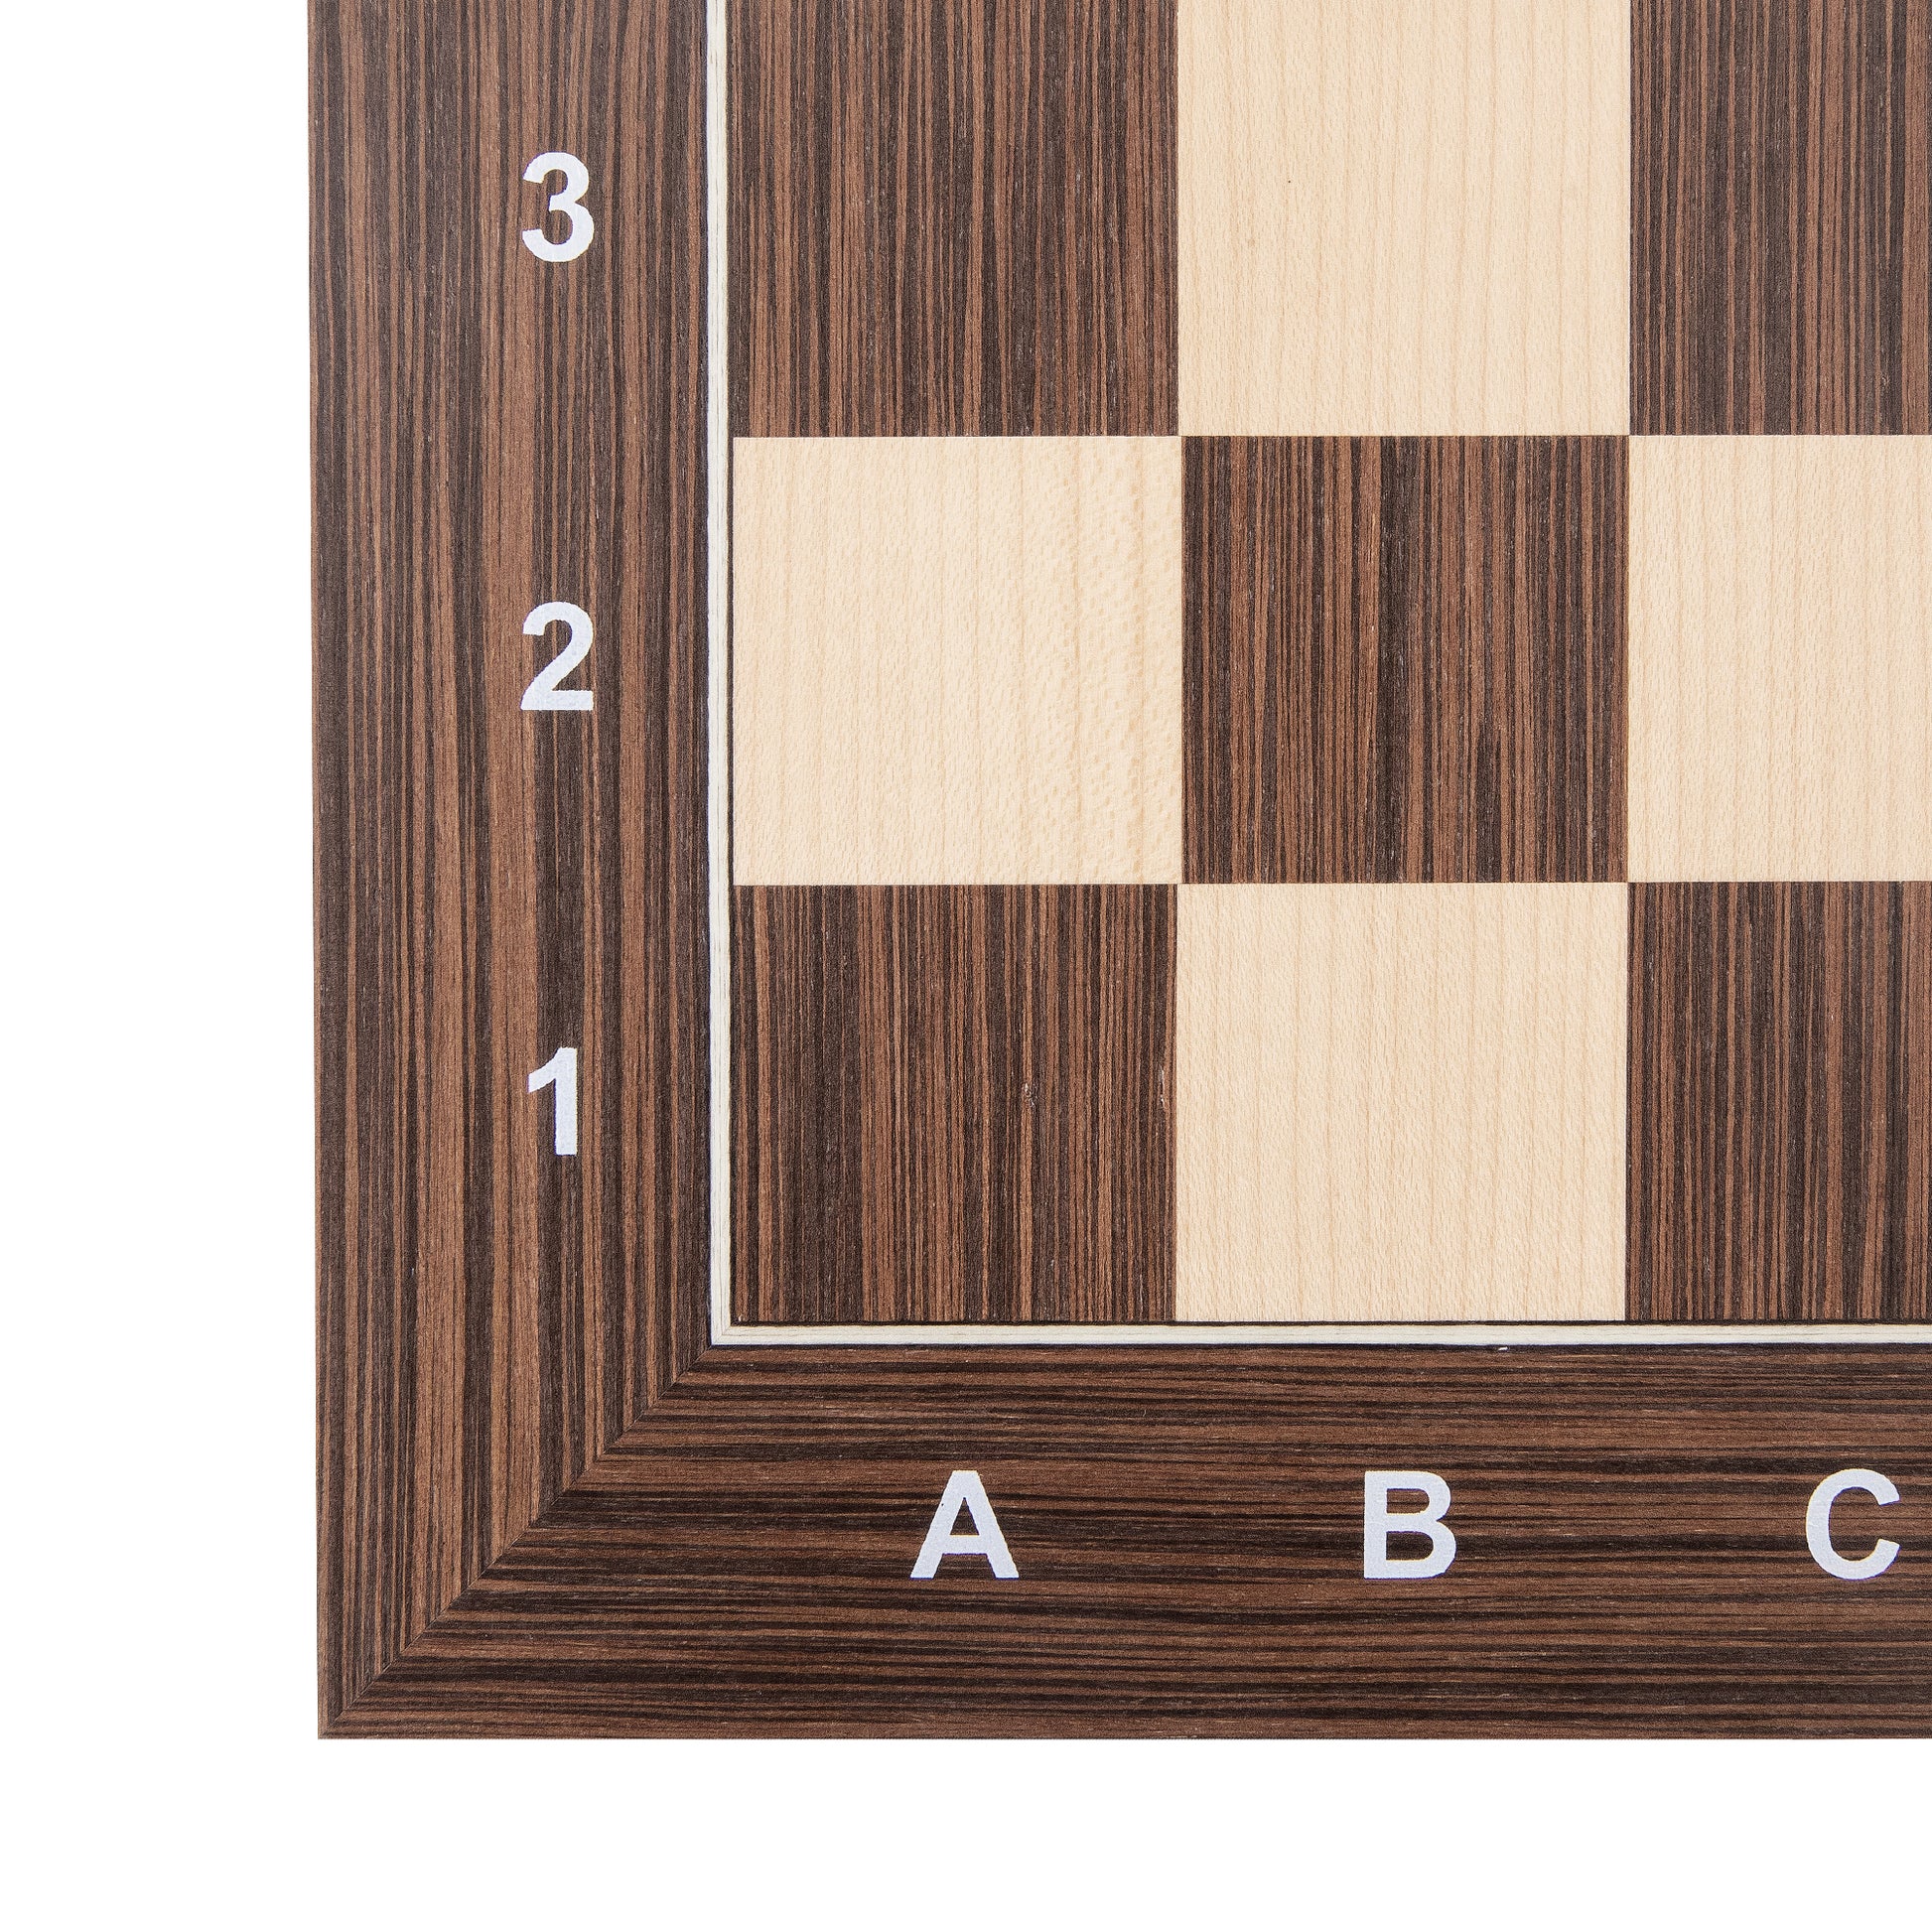  A&A 18.875 Professional Wooden Tournament Chess Board/Mahogany  & Maple Inlaid /2.0 Squares w/Notation : Automotive